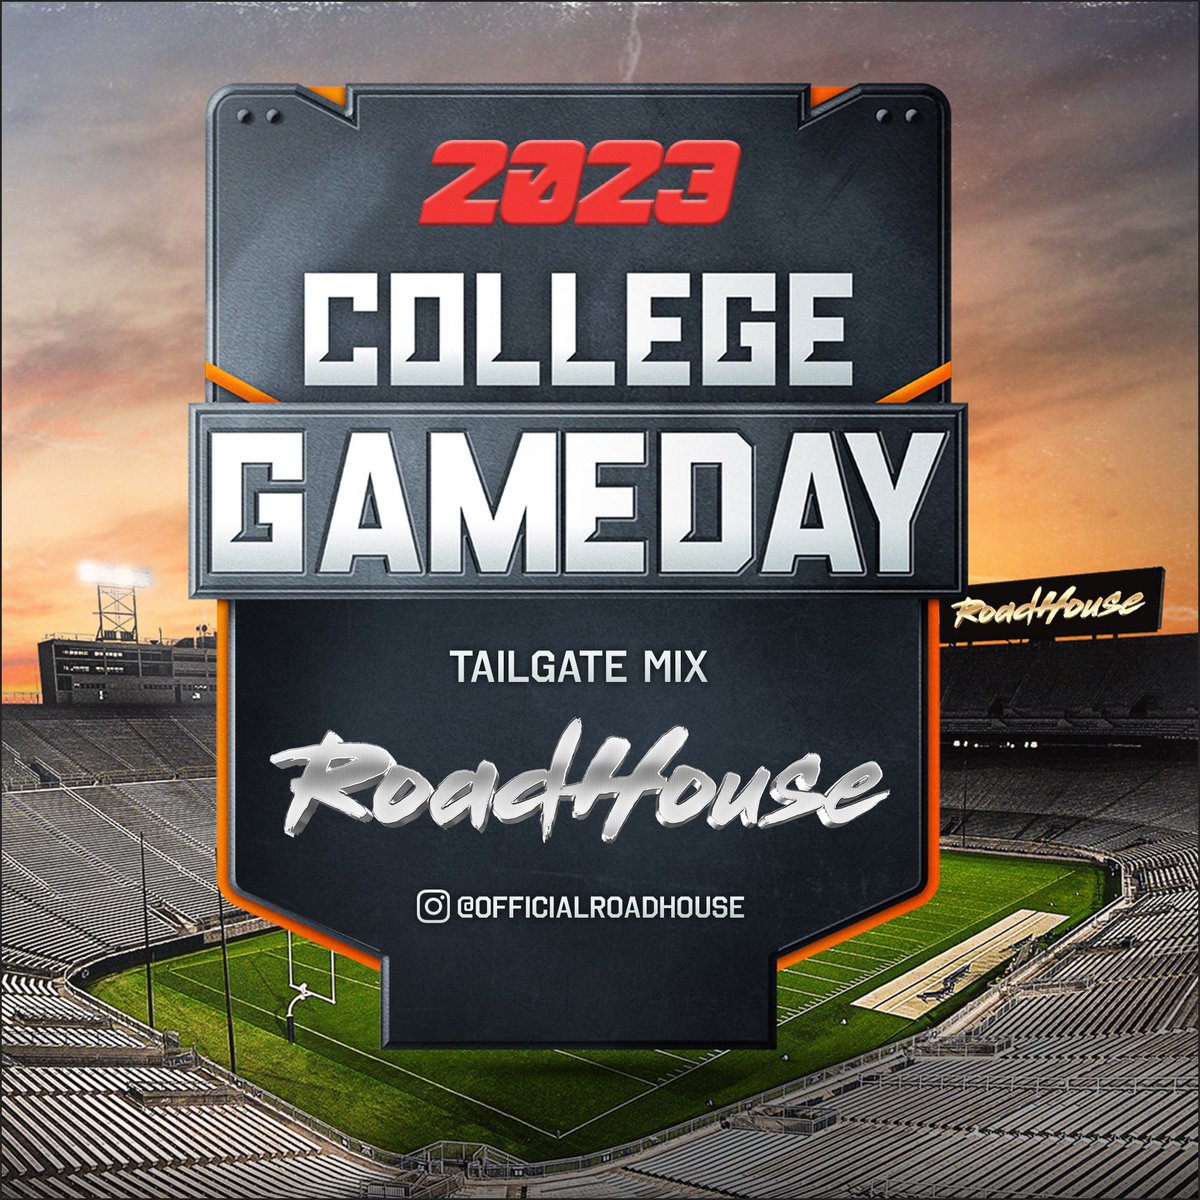 College GameDay Mix for ya! #collegefootball mixcloud.com/DeeJaySilver/2…